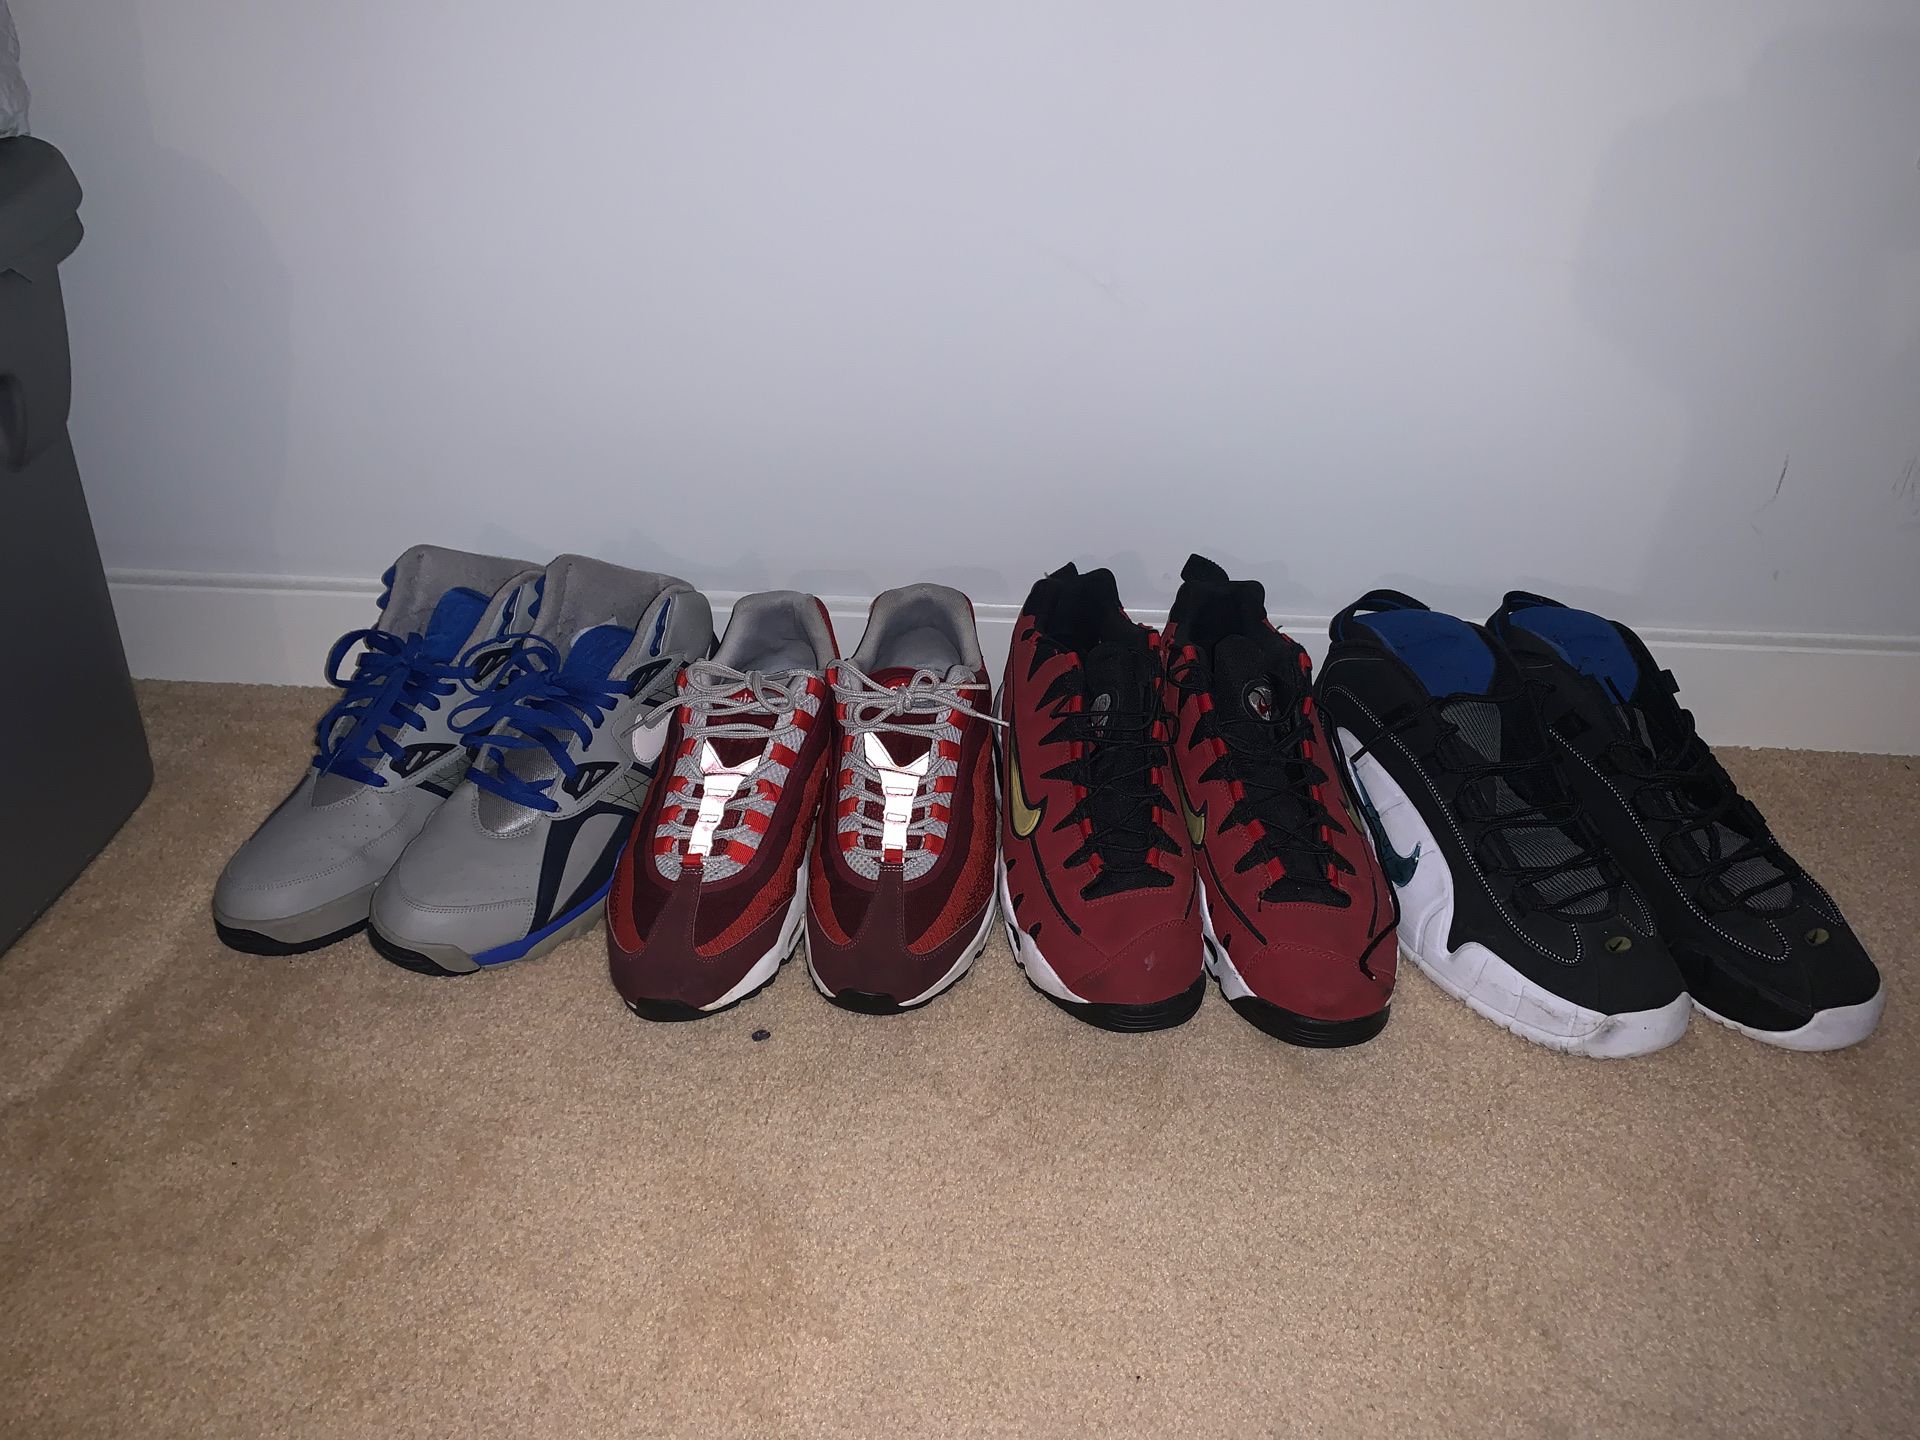 Four pairs of size 12 for sale.